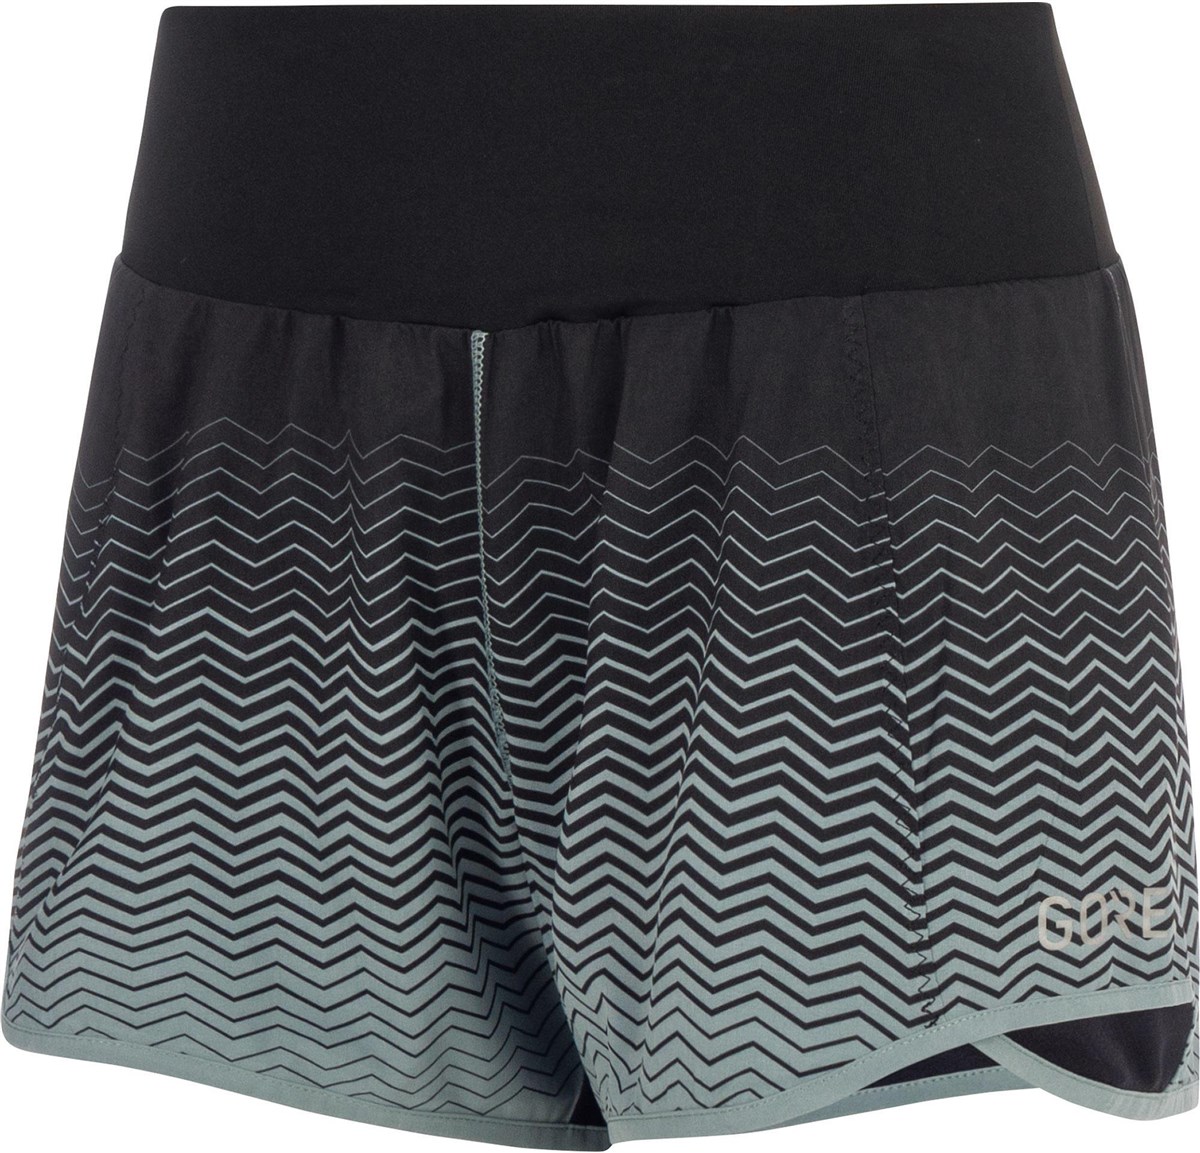 Gore R5 Womens Mistica Light Shorts product image